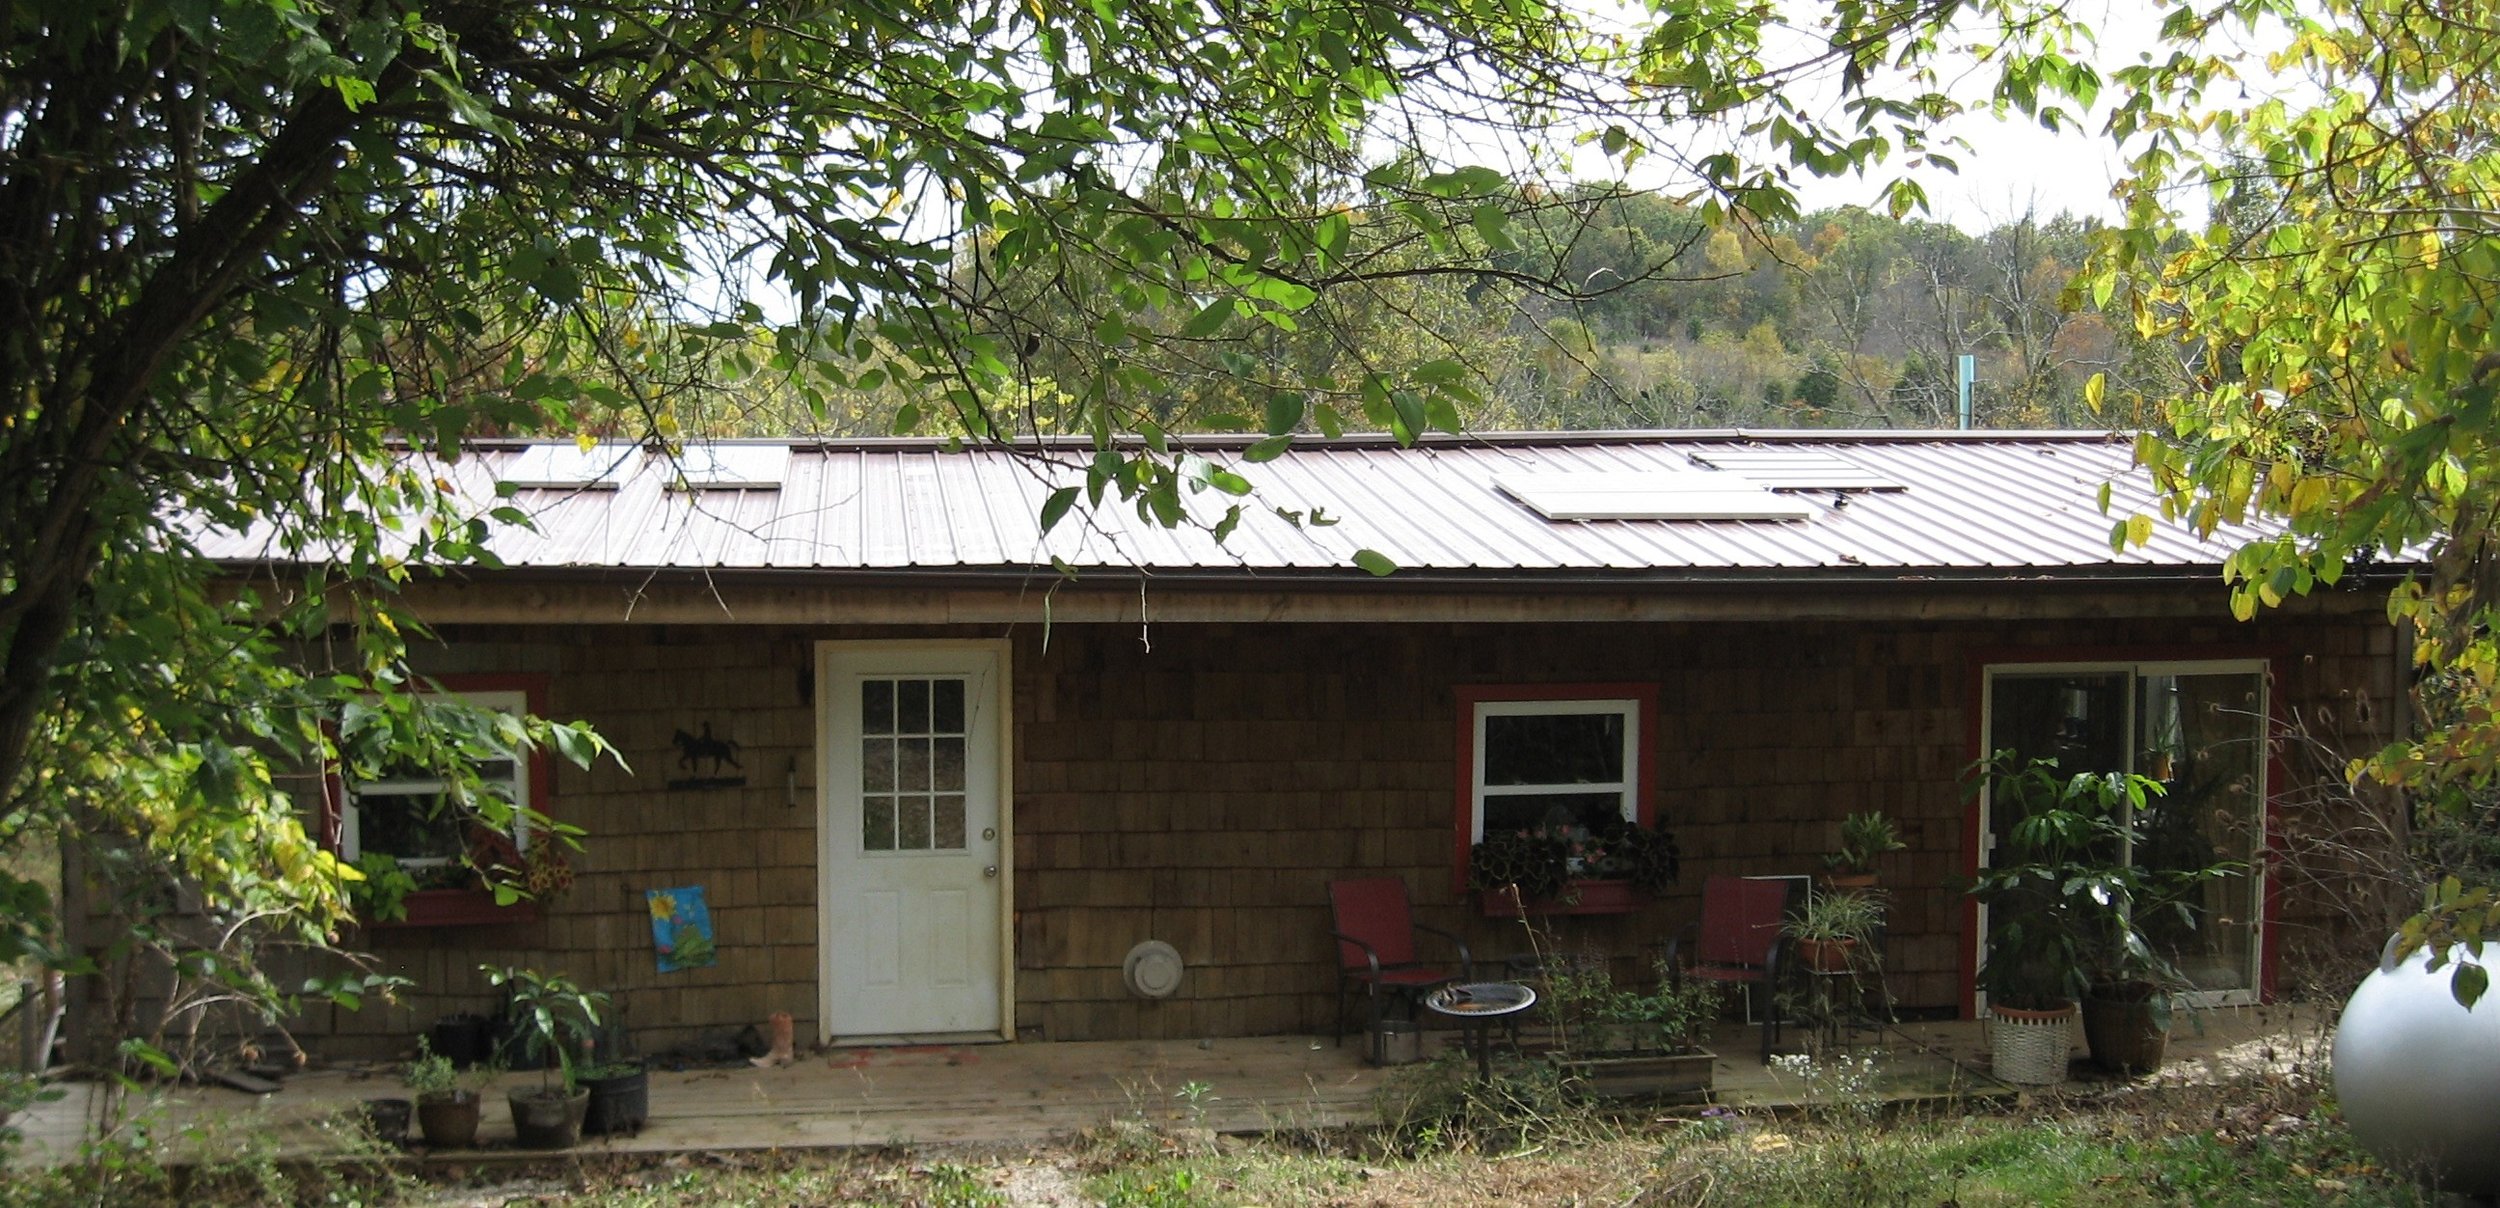 My metal roof supports my solar panels as well as a gutter system which leads to a cistern under the back porch. Fox Run Environmental Education Center